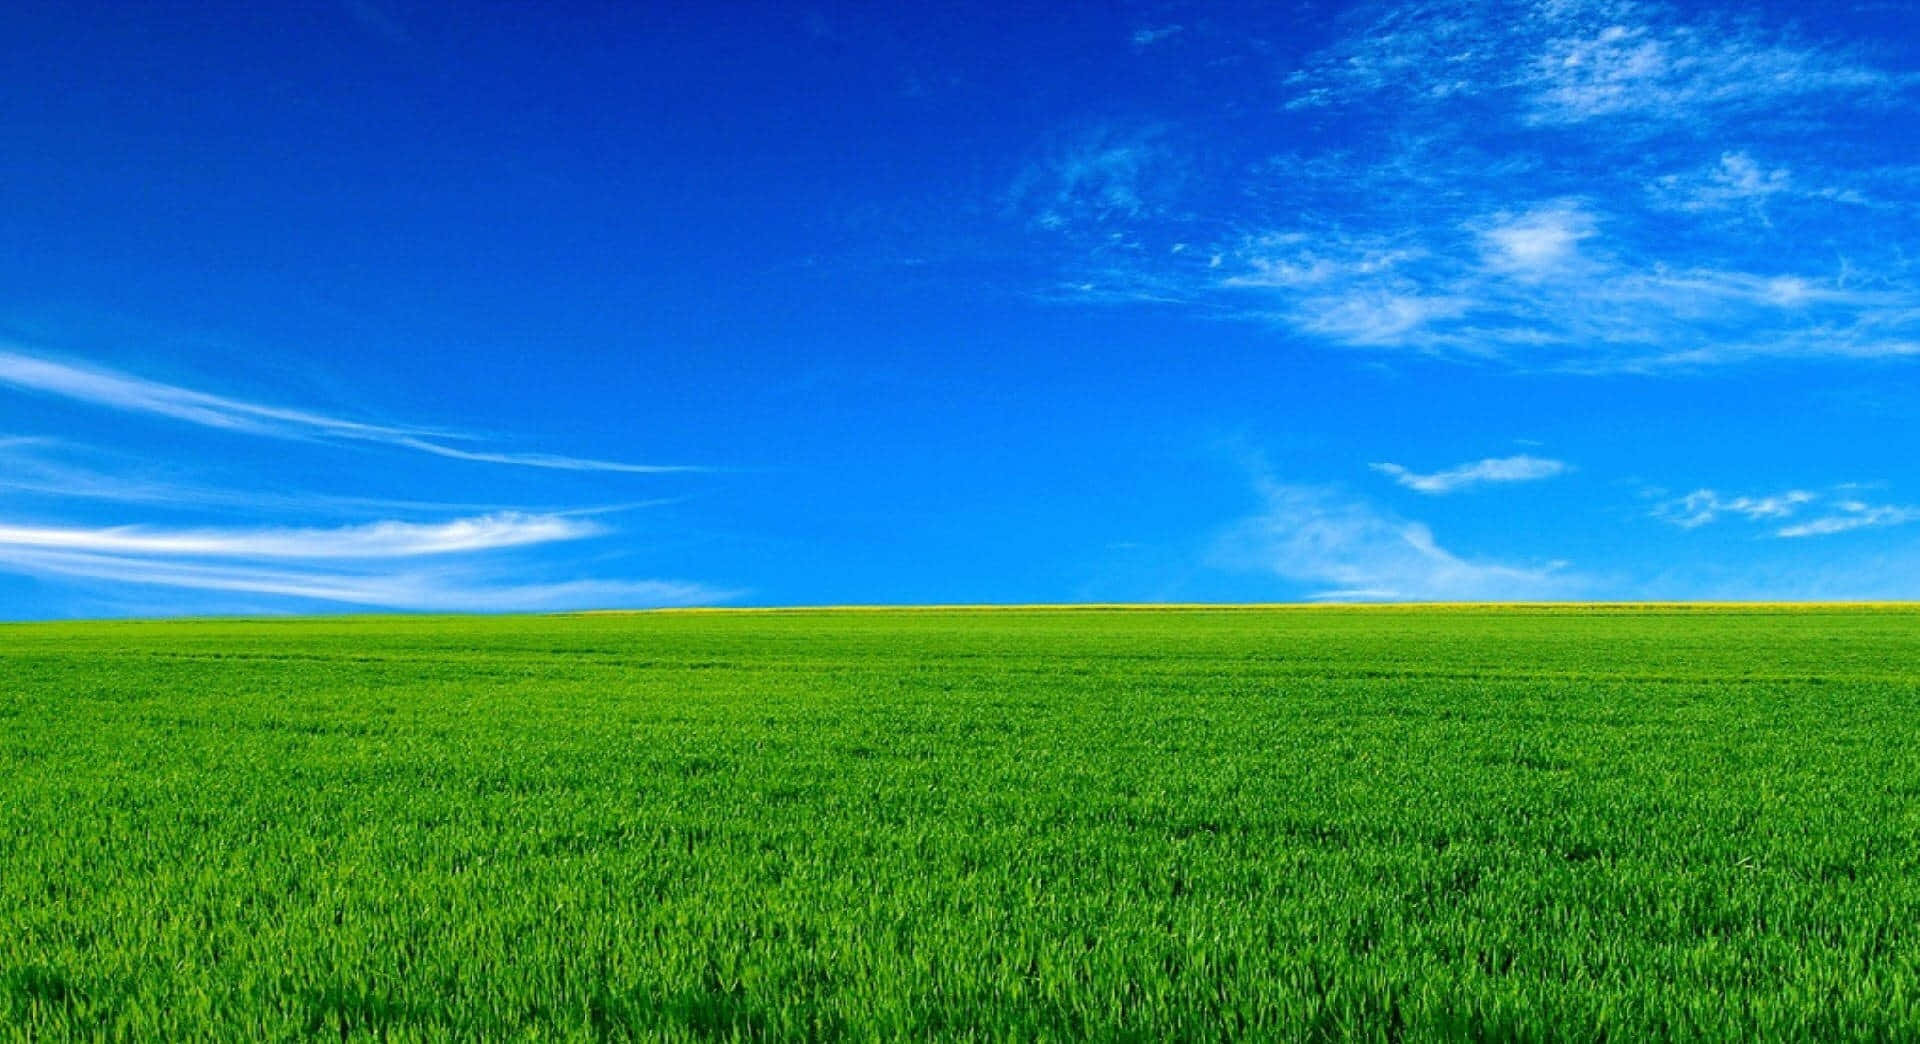 Serene Landscape of Grass and Sky